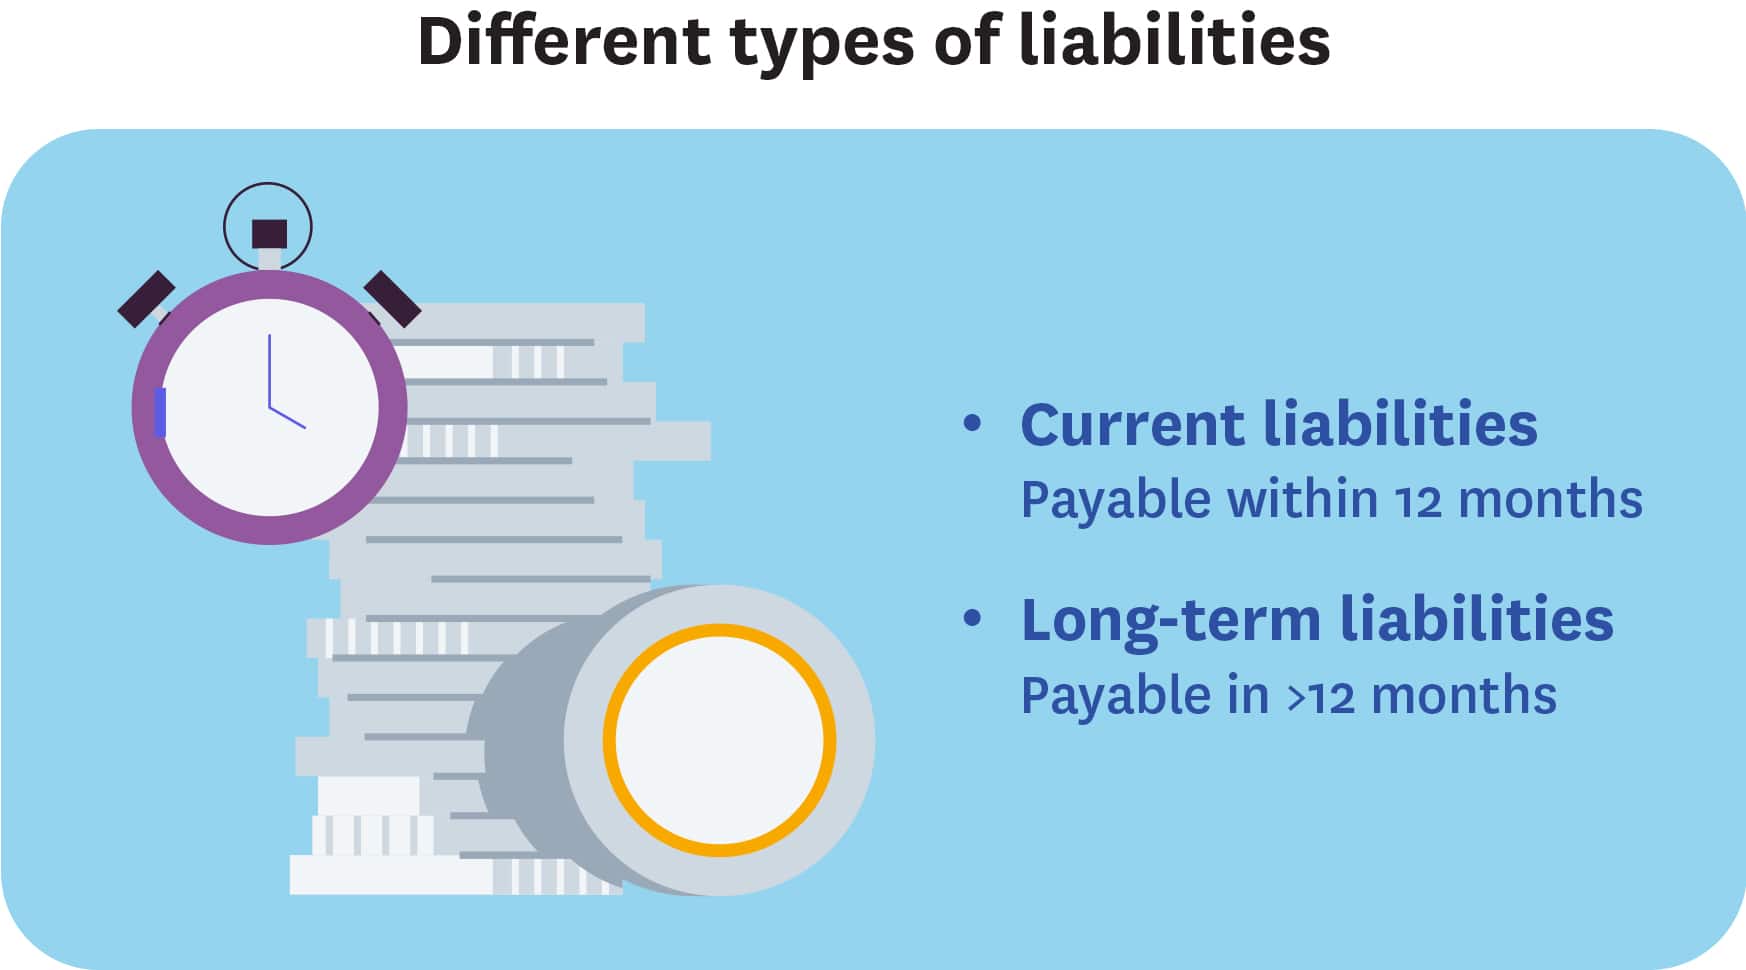 Current liabilities are payable within 12 months, while long-term liabilities are payable beyond 12 months.